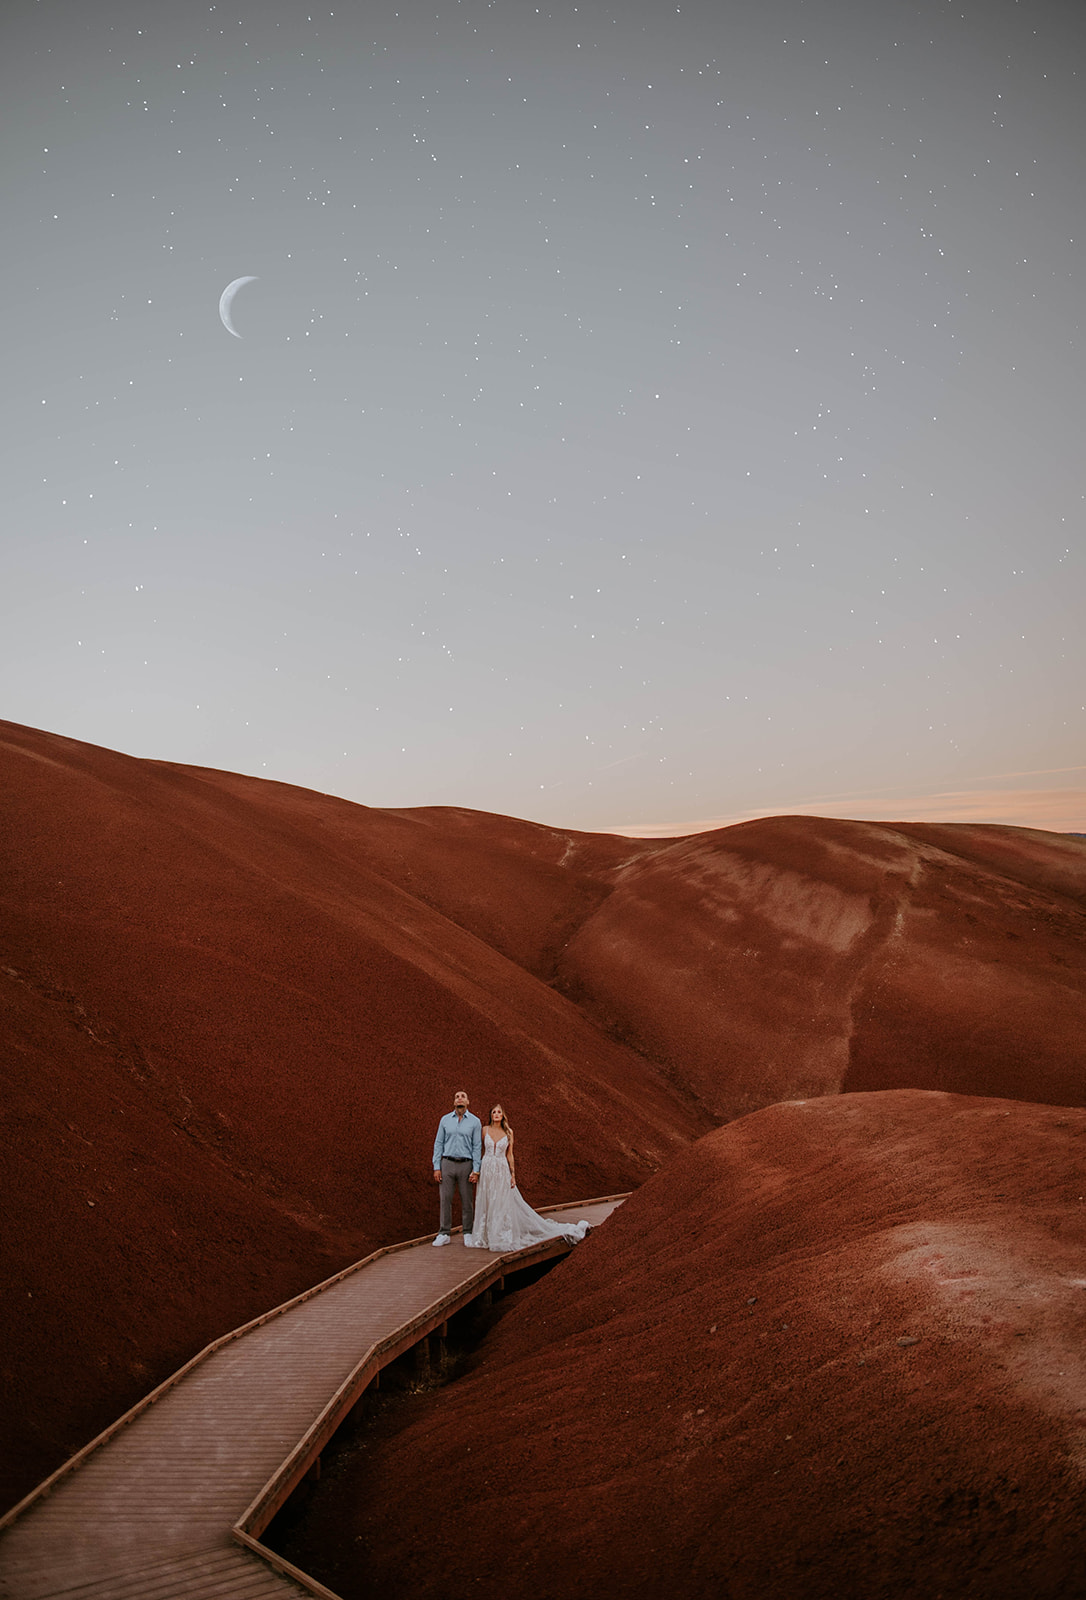 A couple who just eloped looking up at the moon and stars on the bridge at the Painted Hills